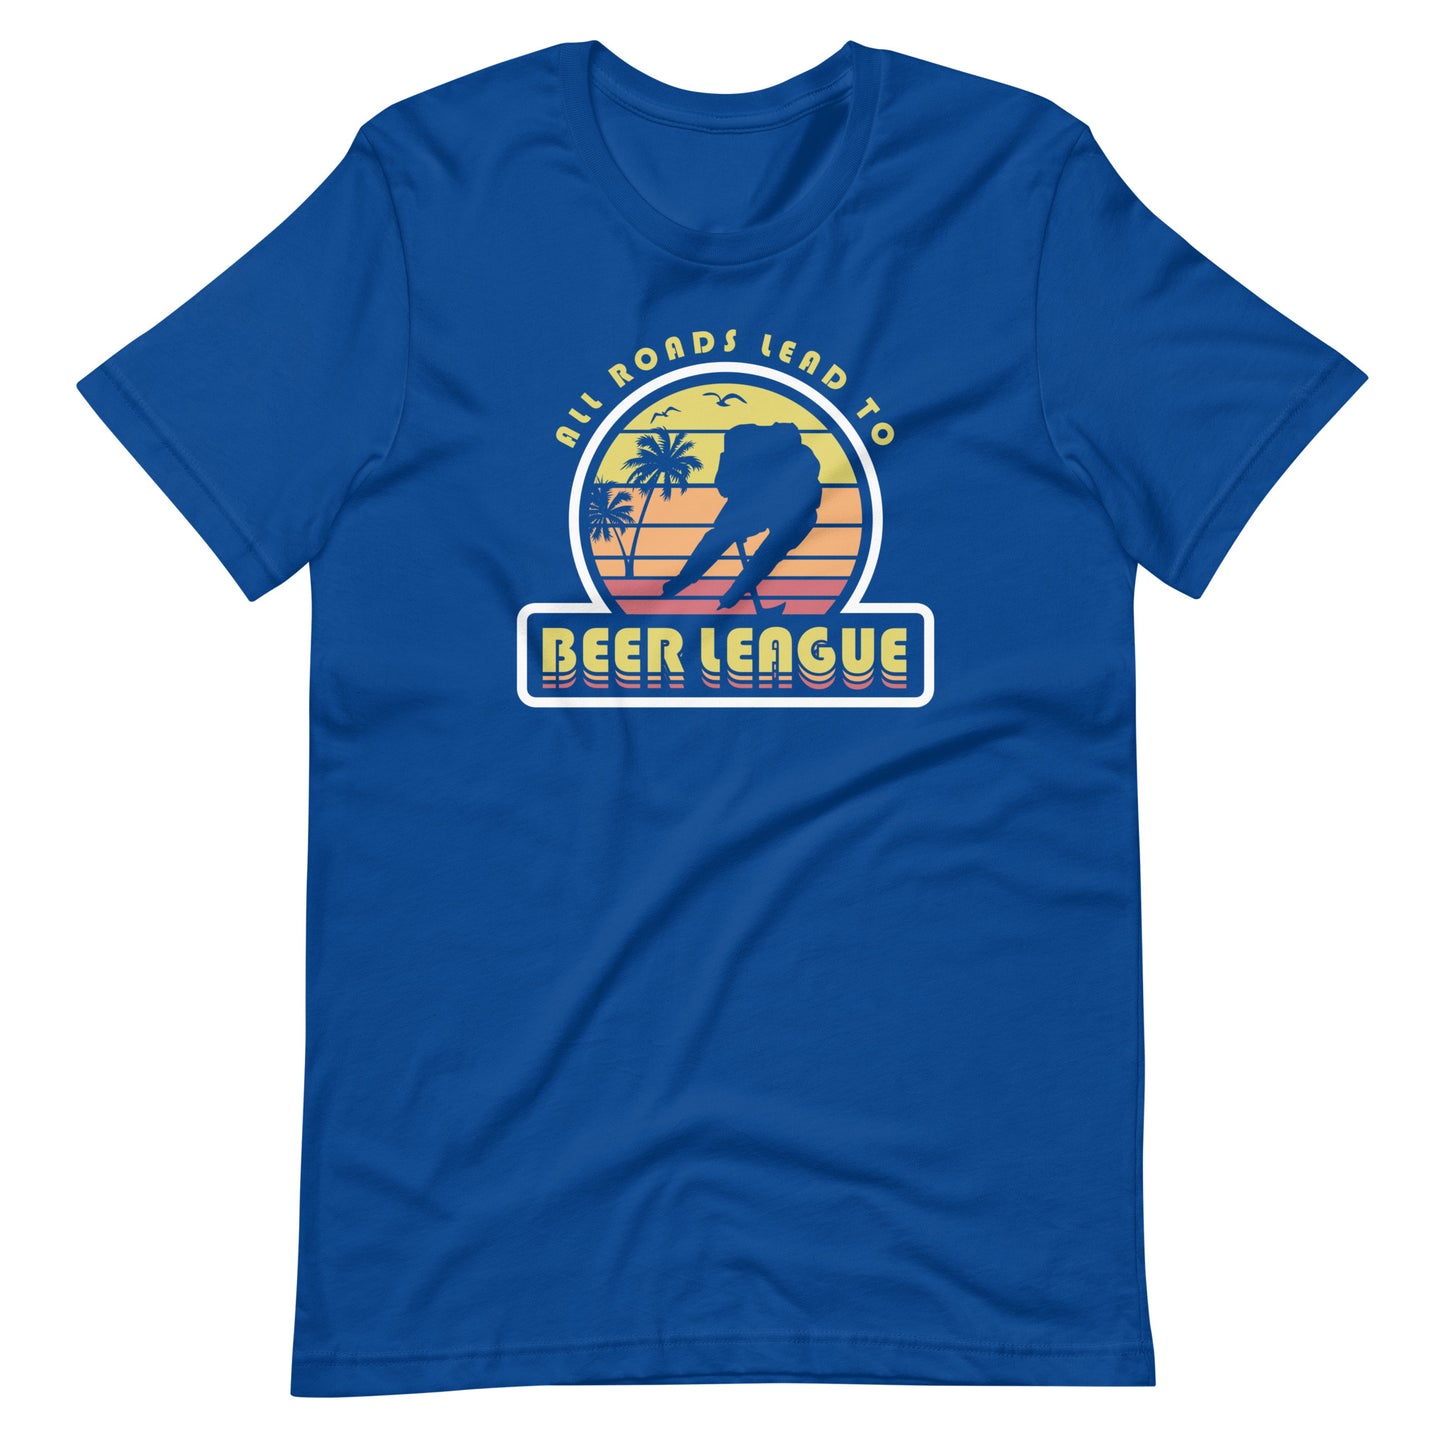 All Roads Lead to Beer League Unisex T-Shirt